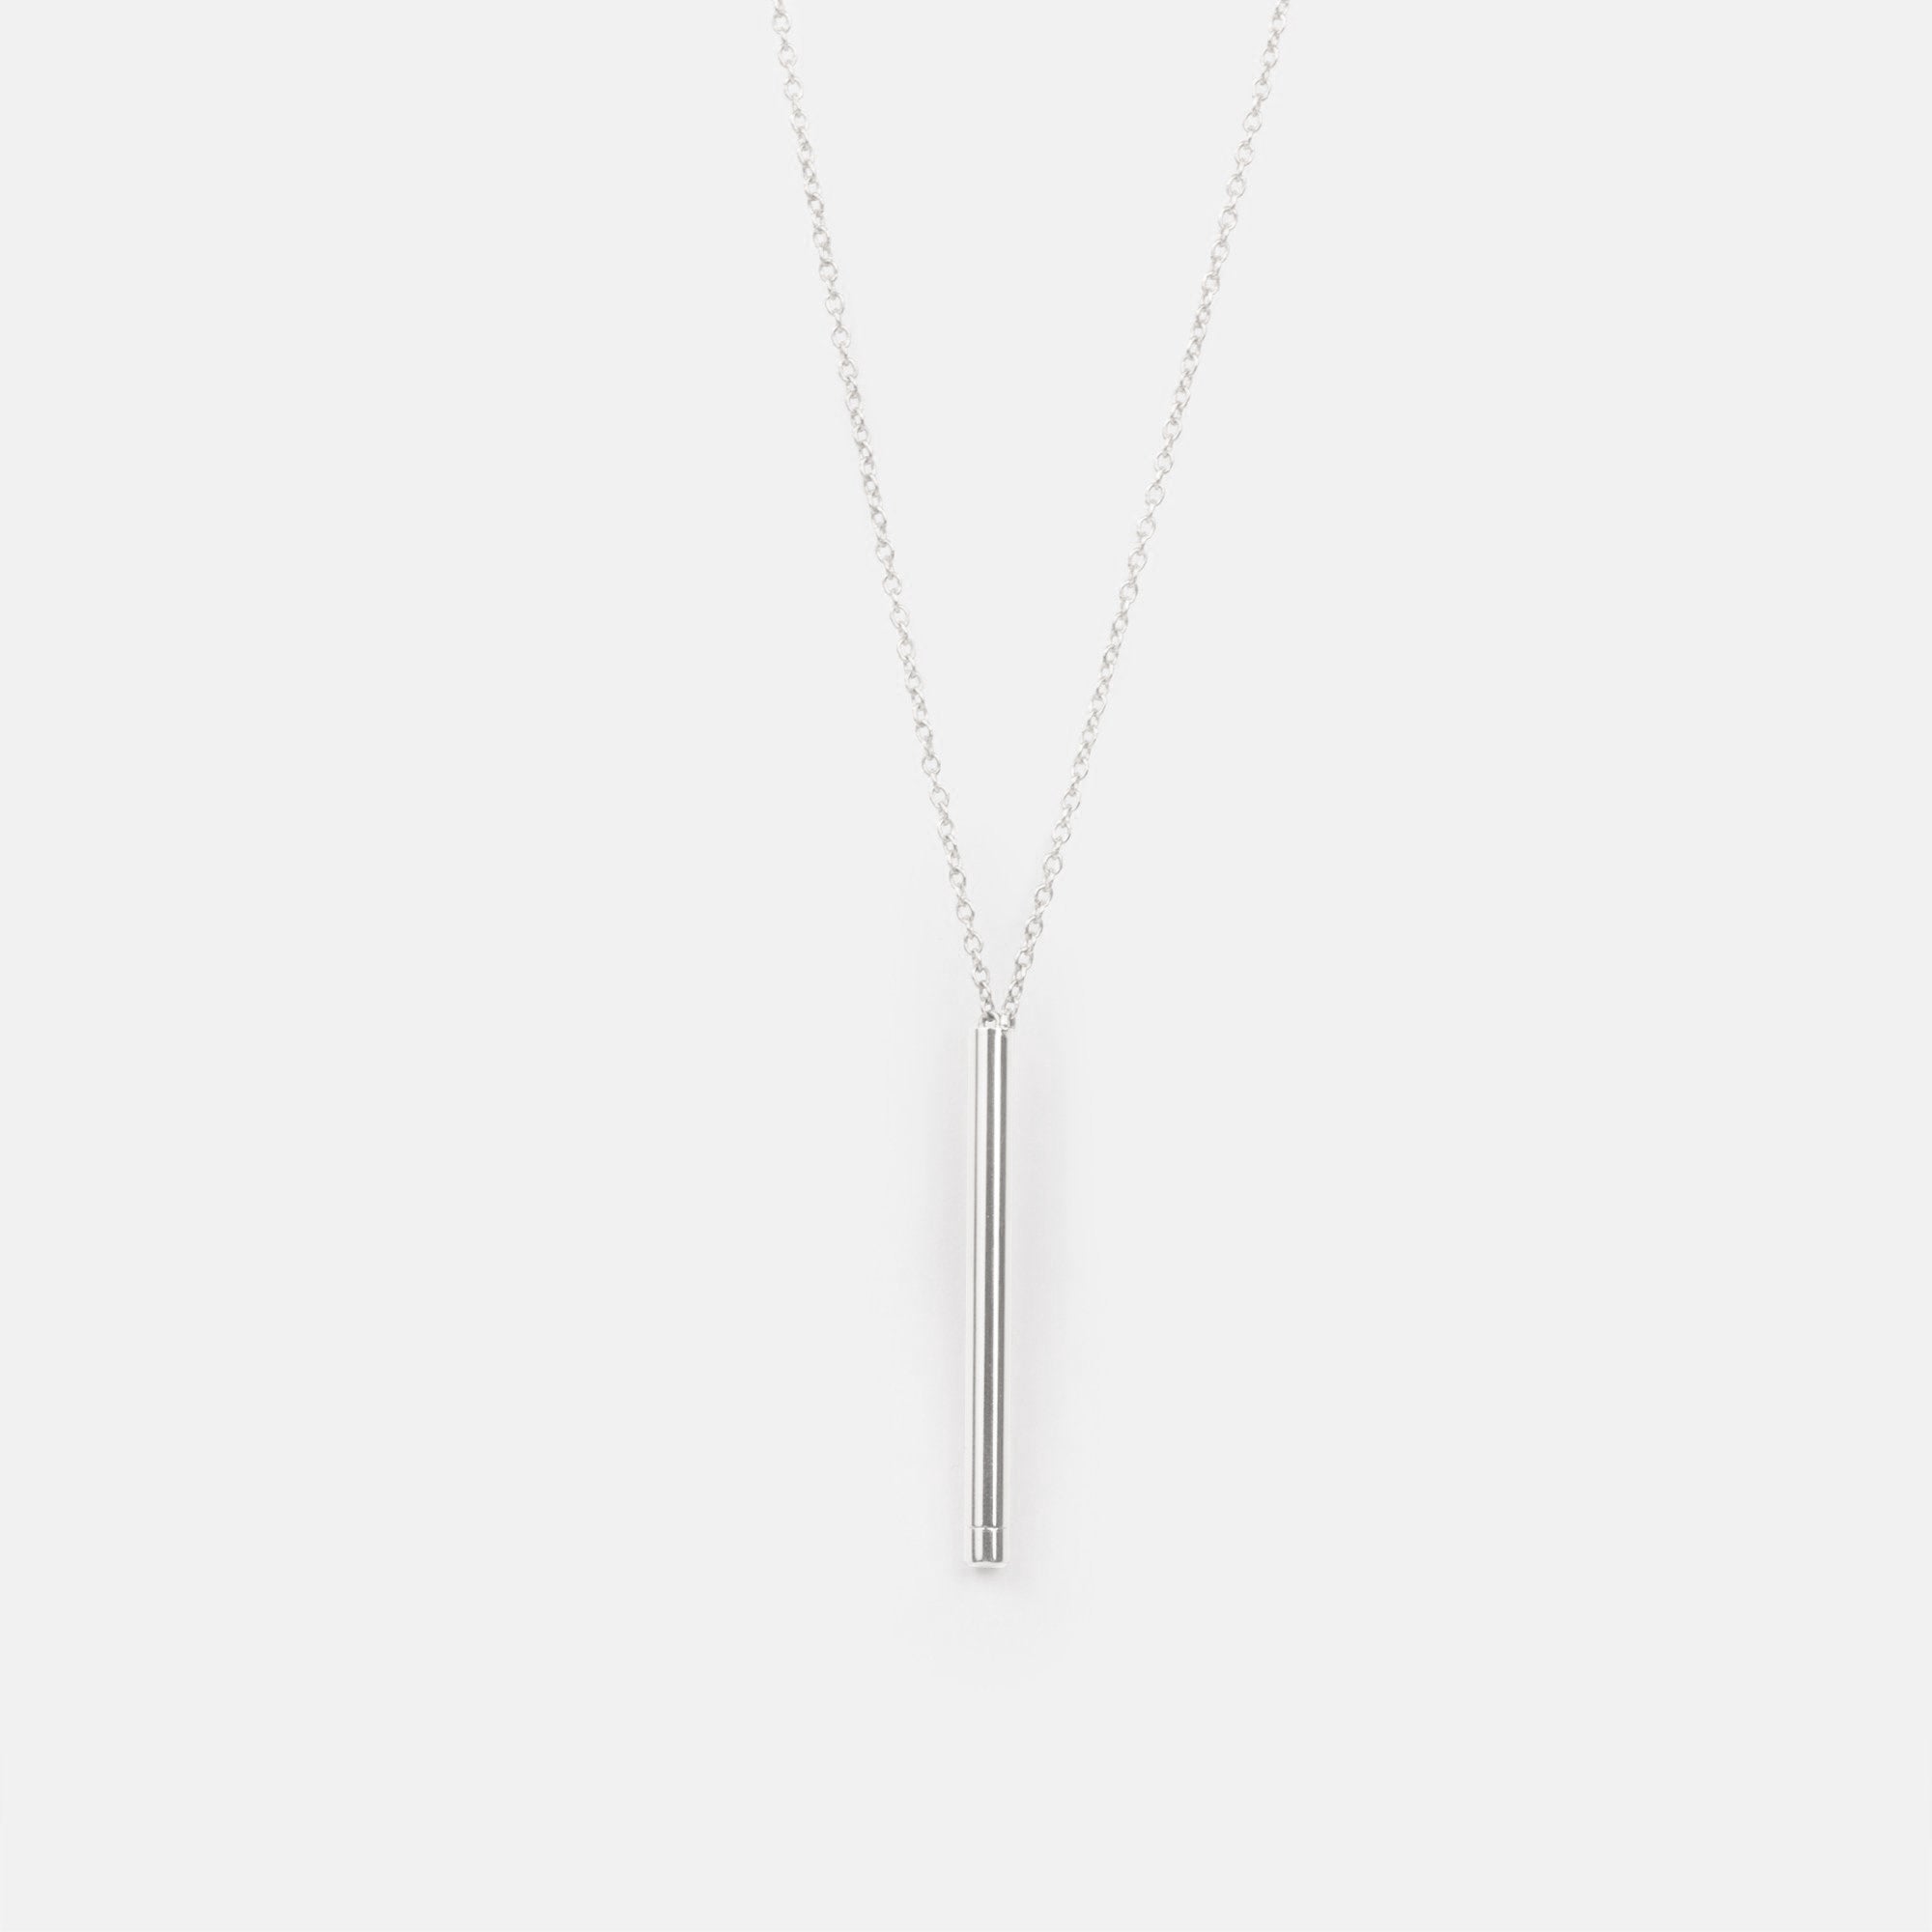 Drasa Unique Necklace in Sterling Silver By SHW Fine Jewelry NYC